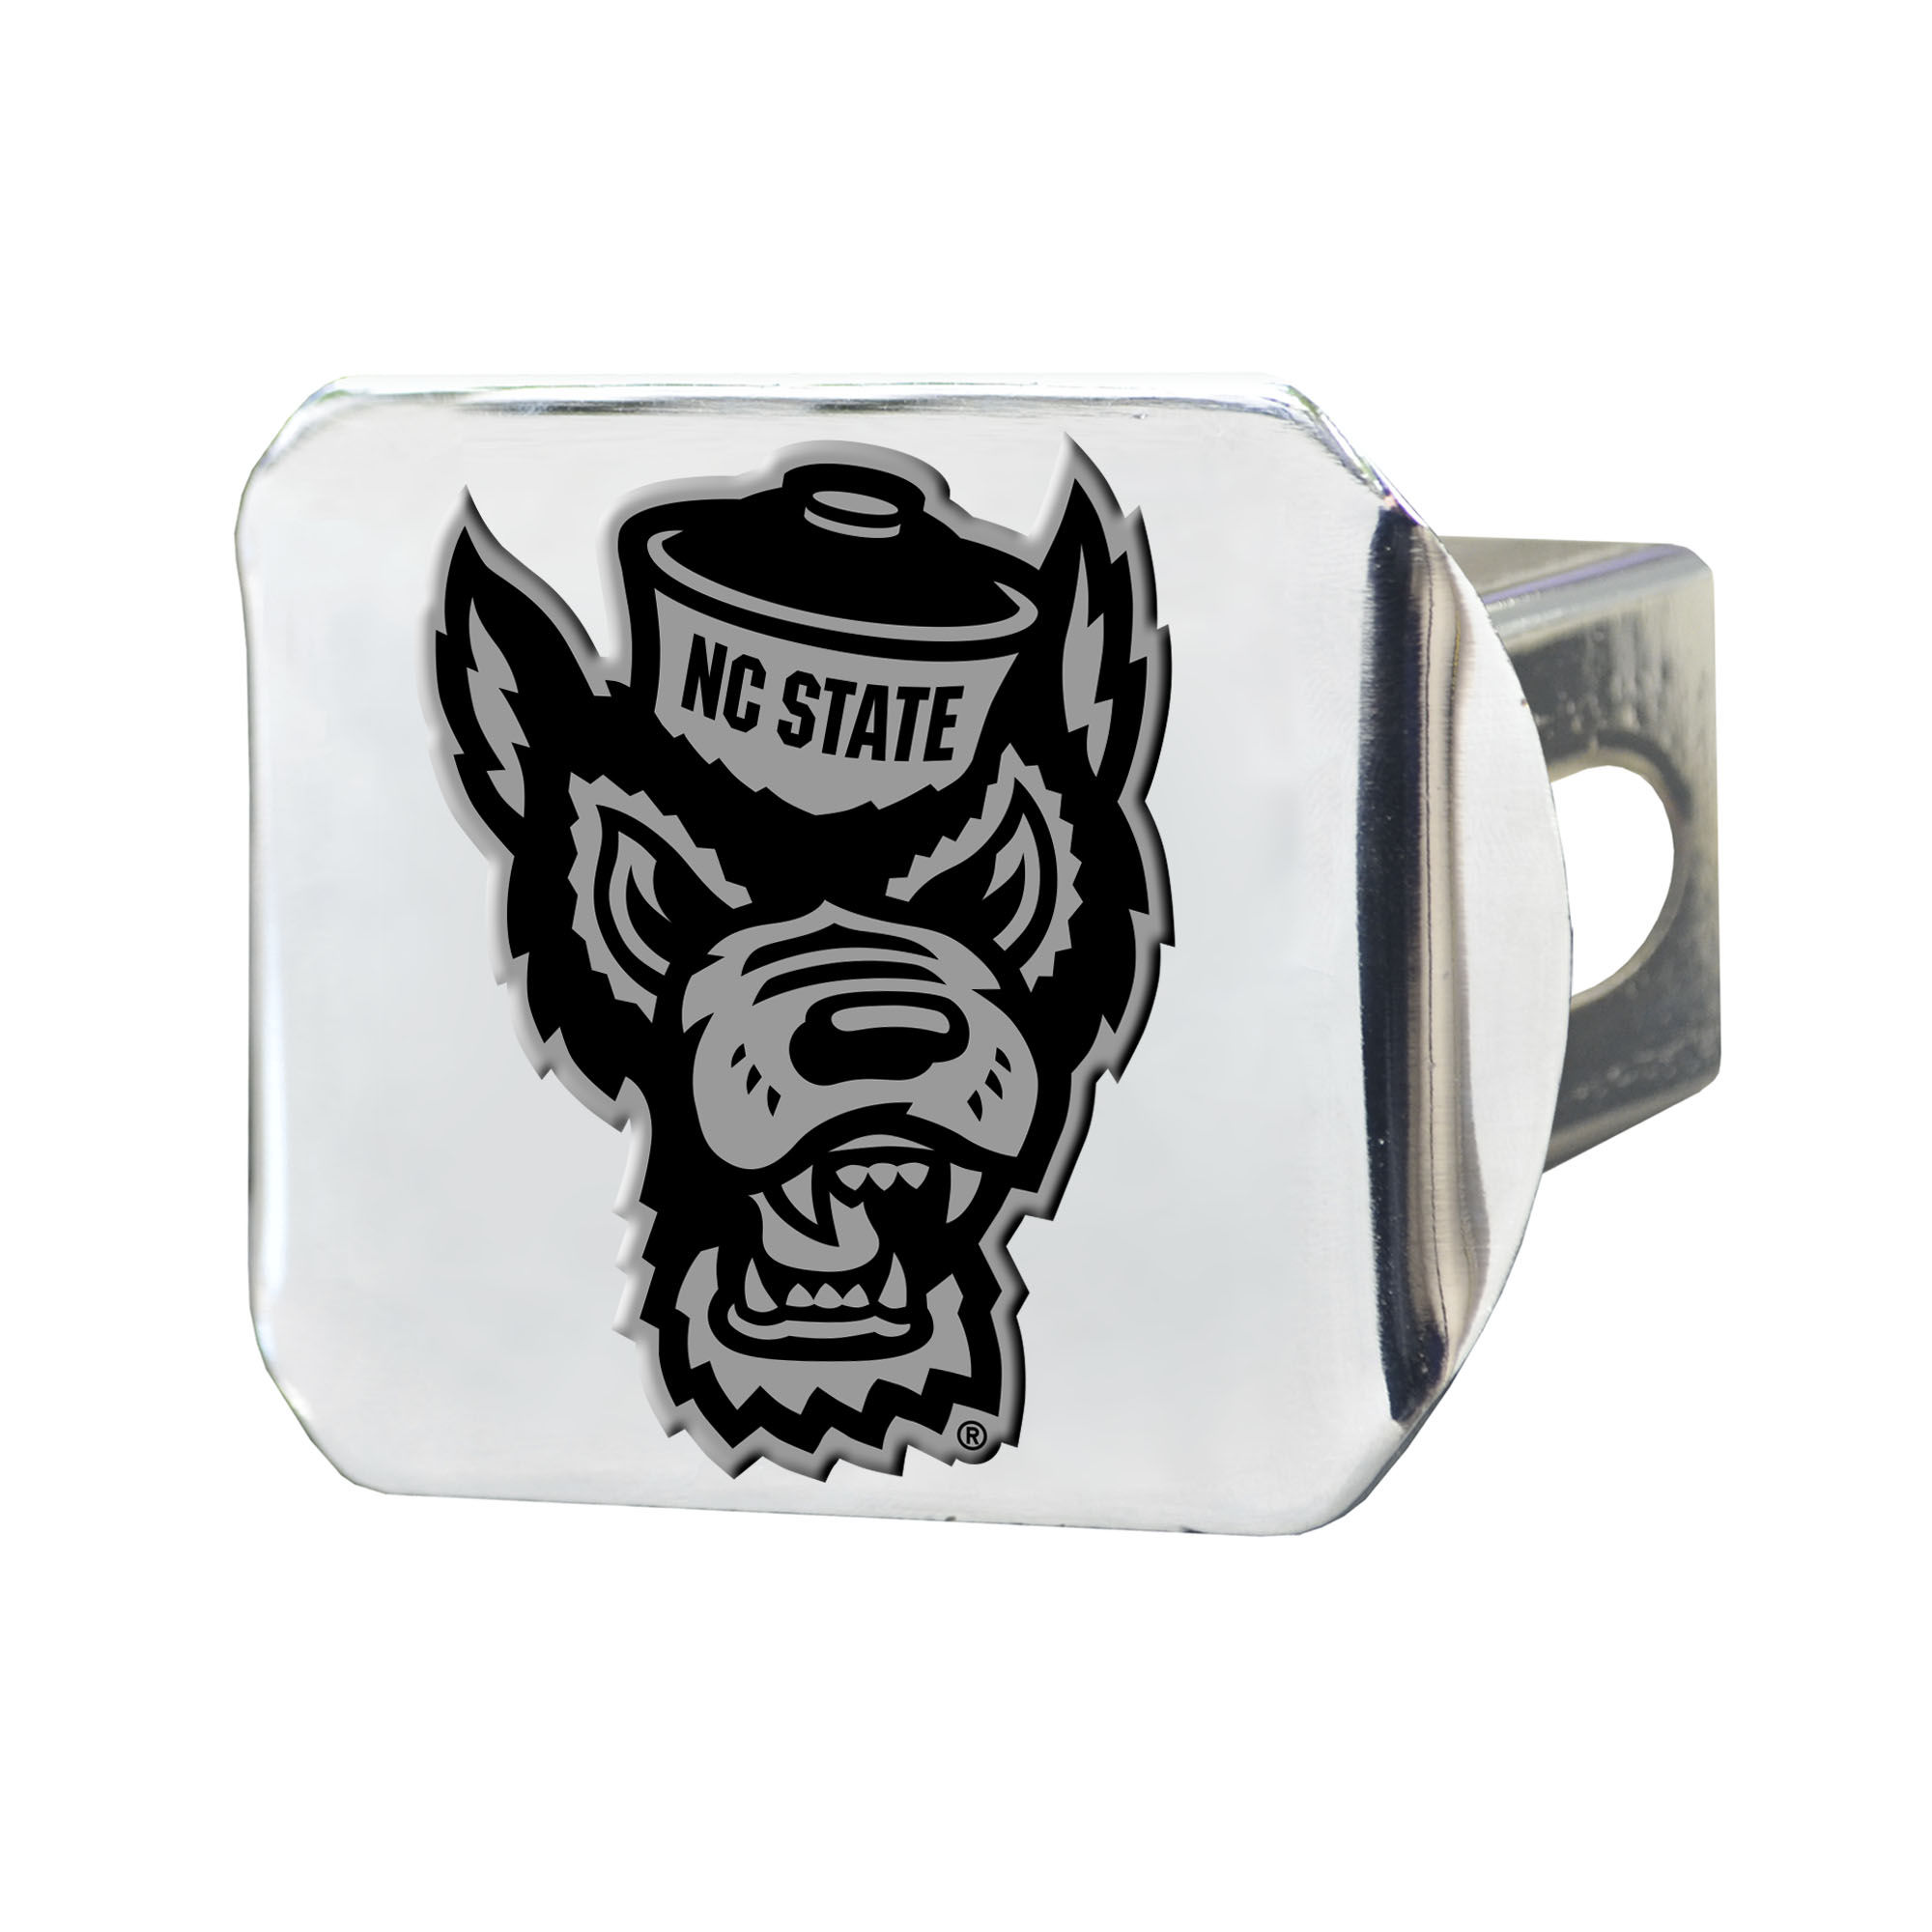 Fanmats 25585 3.4 x 4 in. NC State Wolfpack Chrome Metal Hitch Cover with 3D Emblem